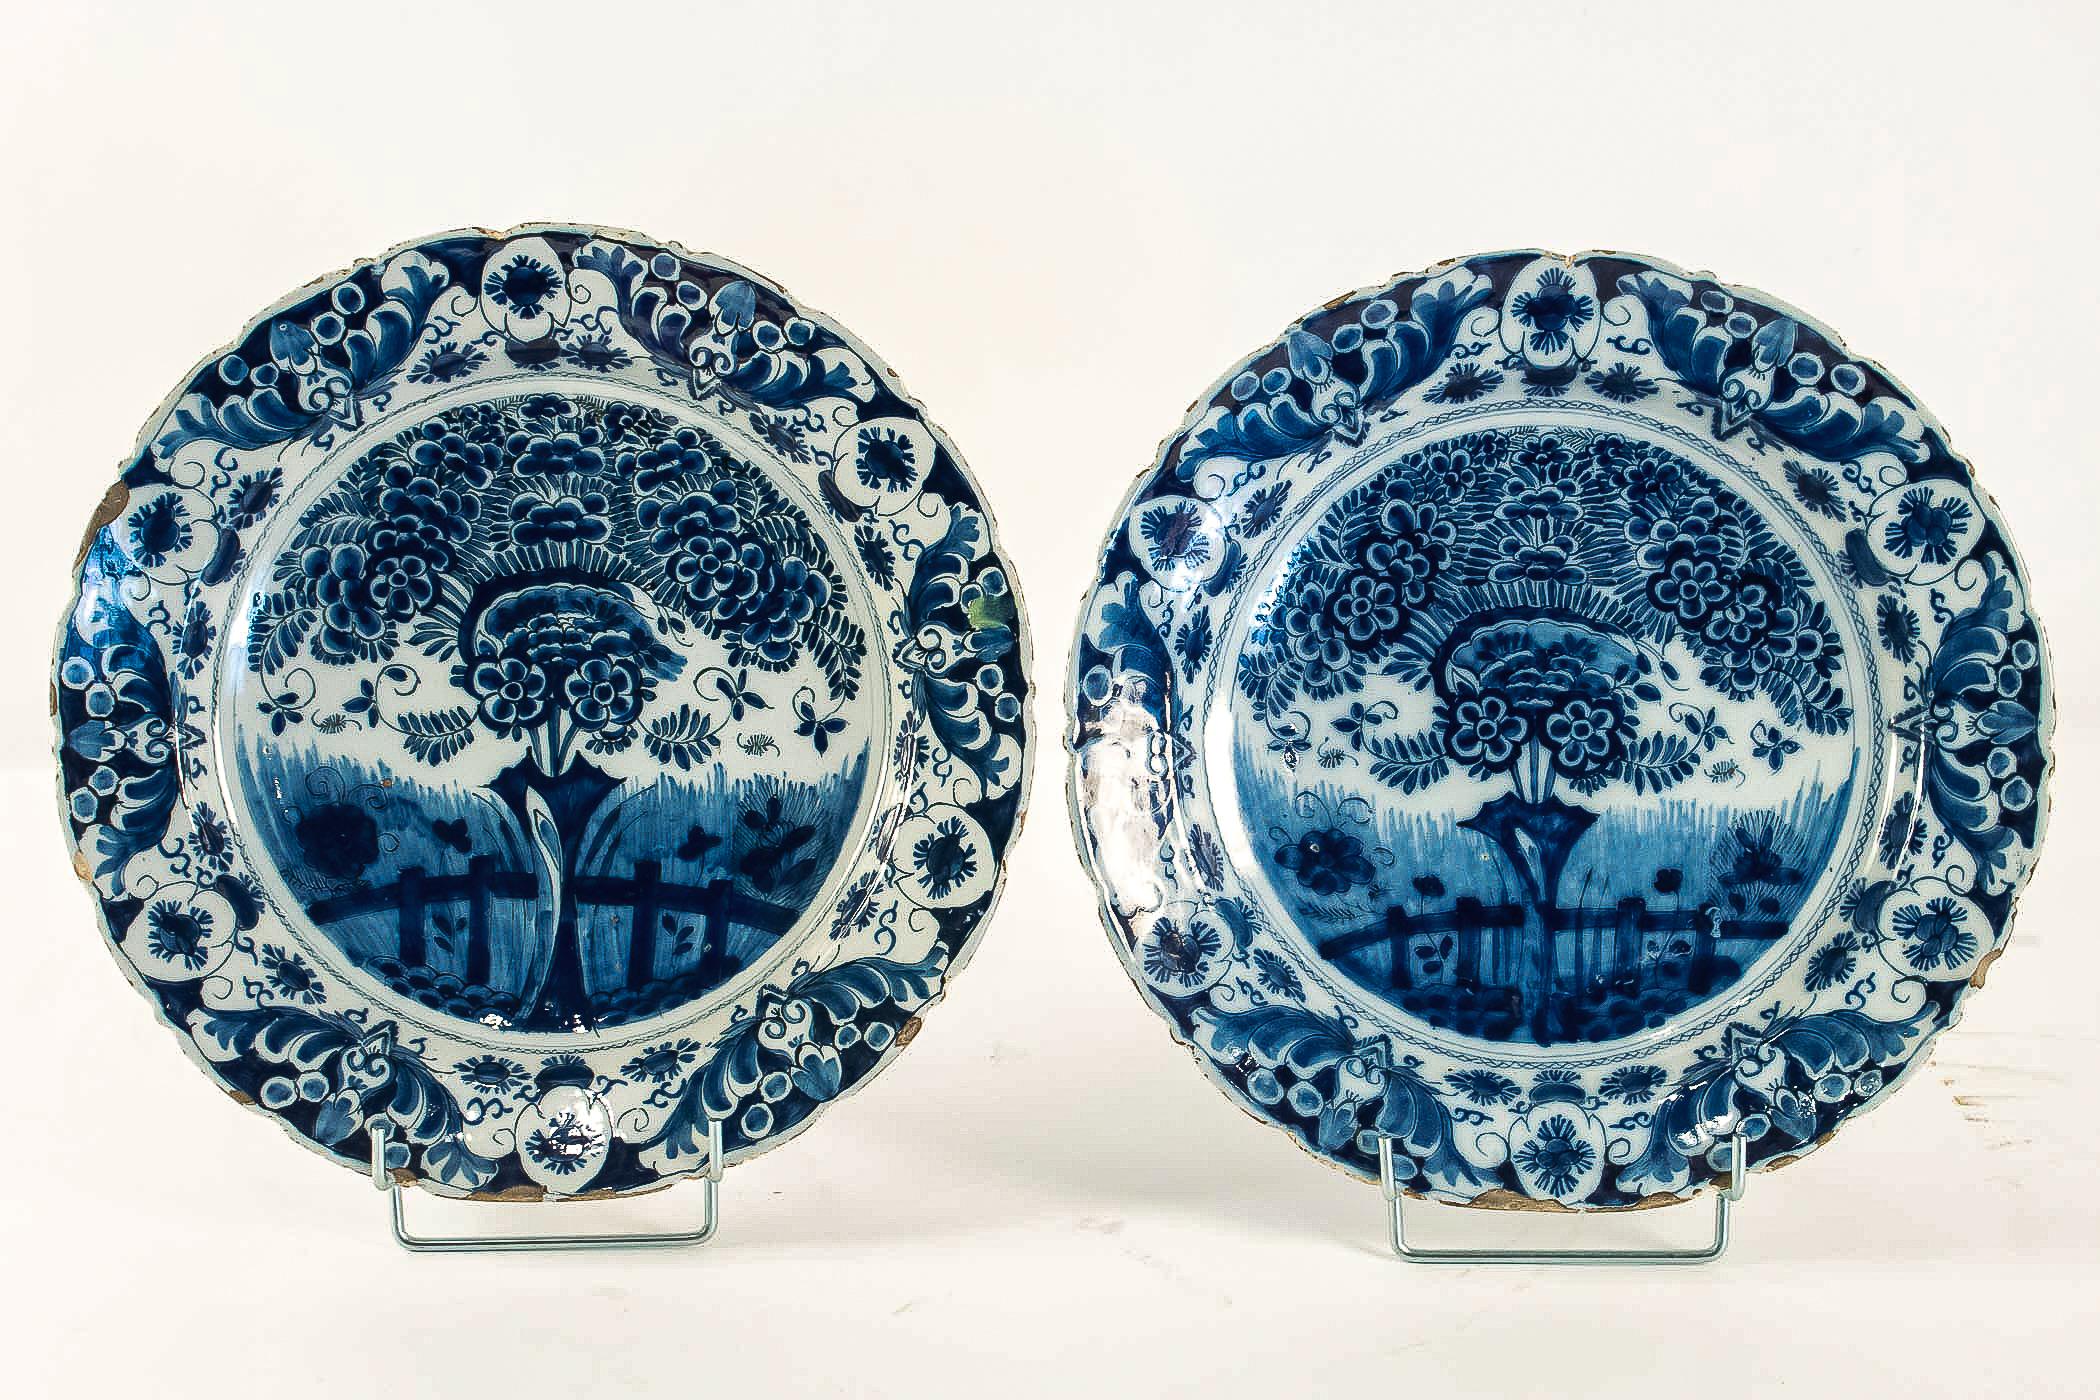 Dutch Sign by Claw 490 Brand, Early 18th Century, Pair of Faience Delft Round Dishes